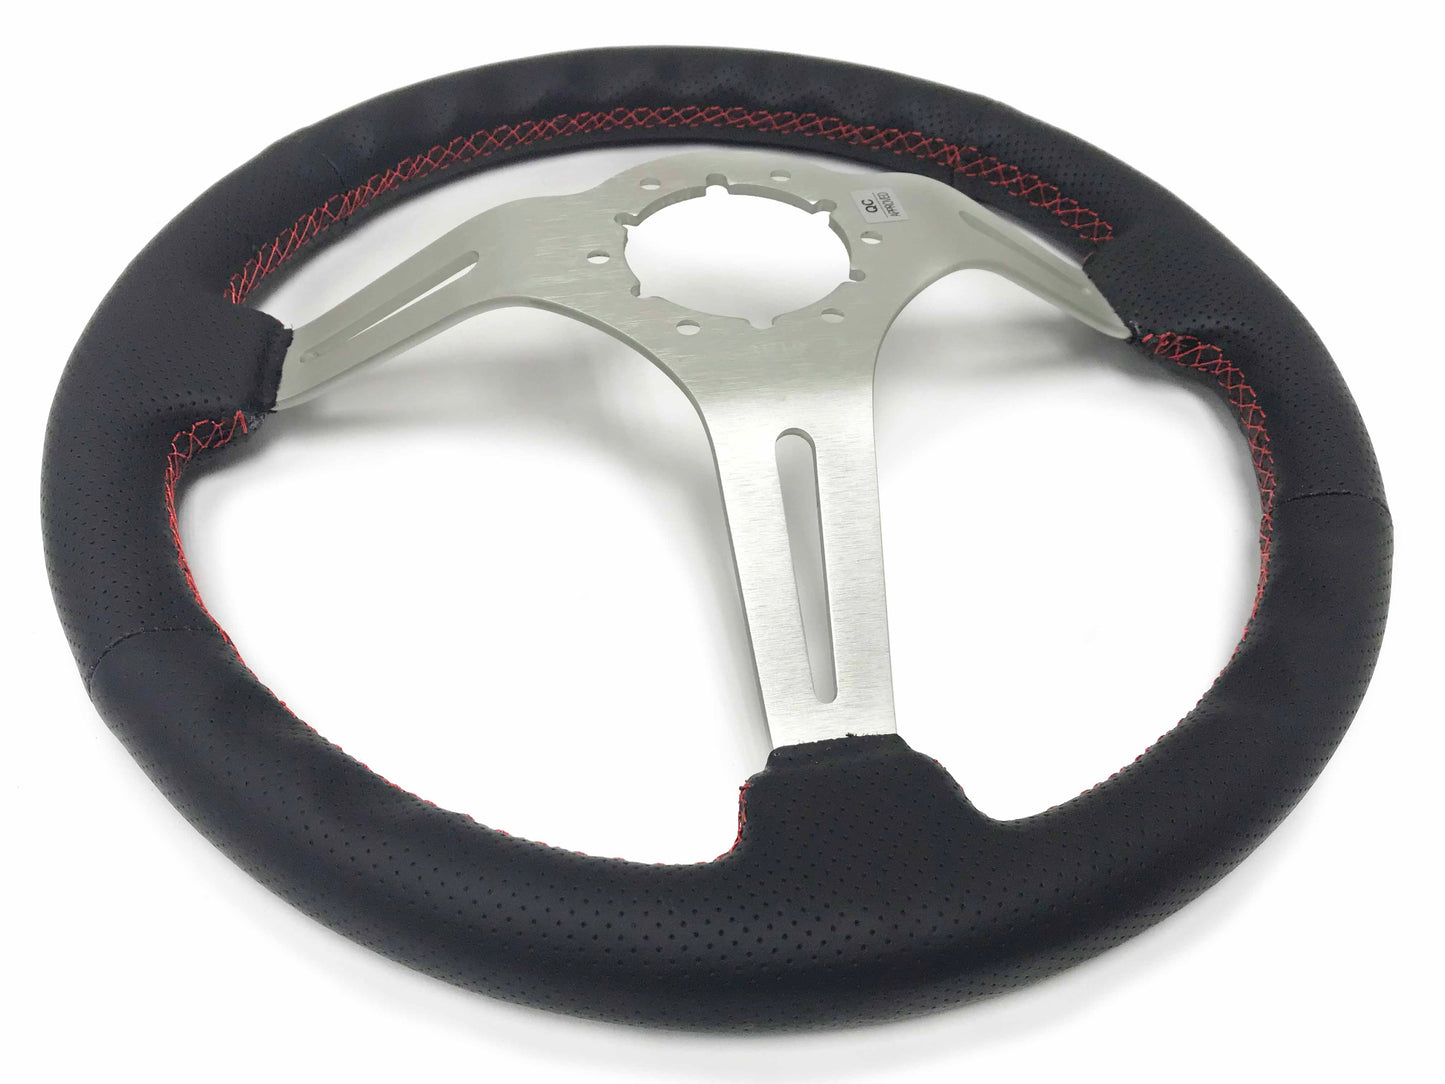 VSW S6 Steering Wheel | Perforated Leather Brushed Aluminum w/ Red Stitch | ST3587BLK-RED